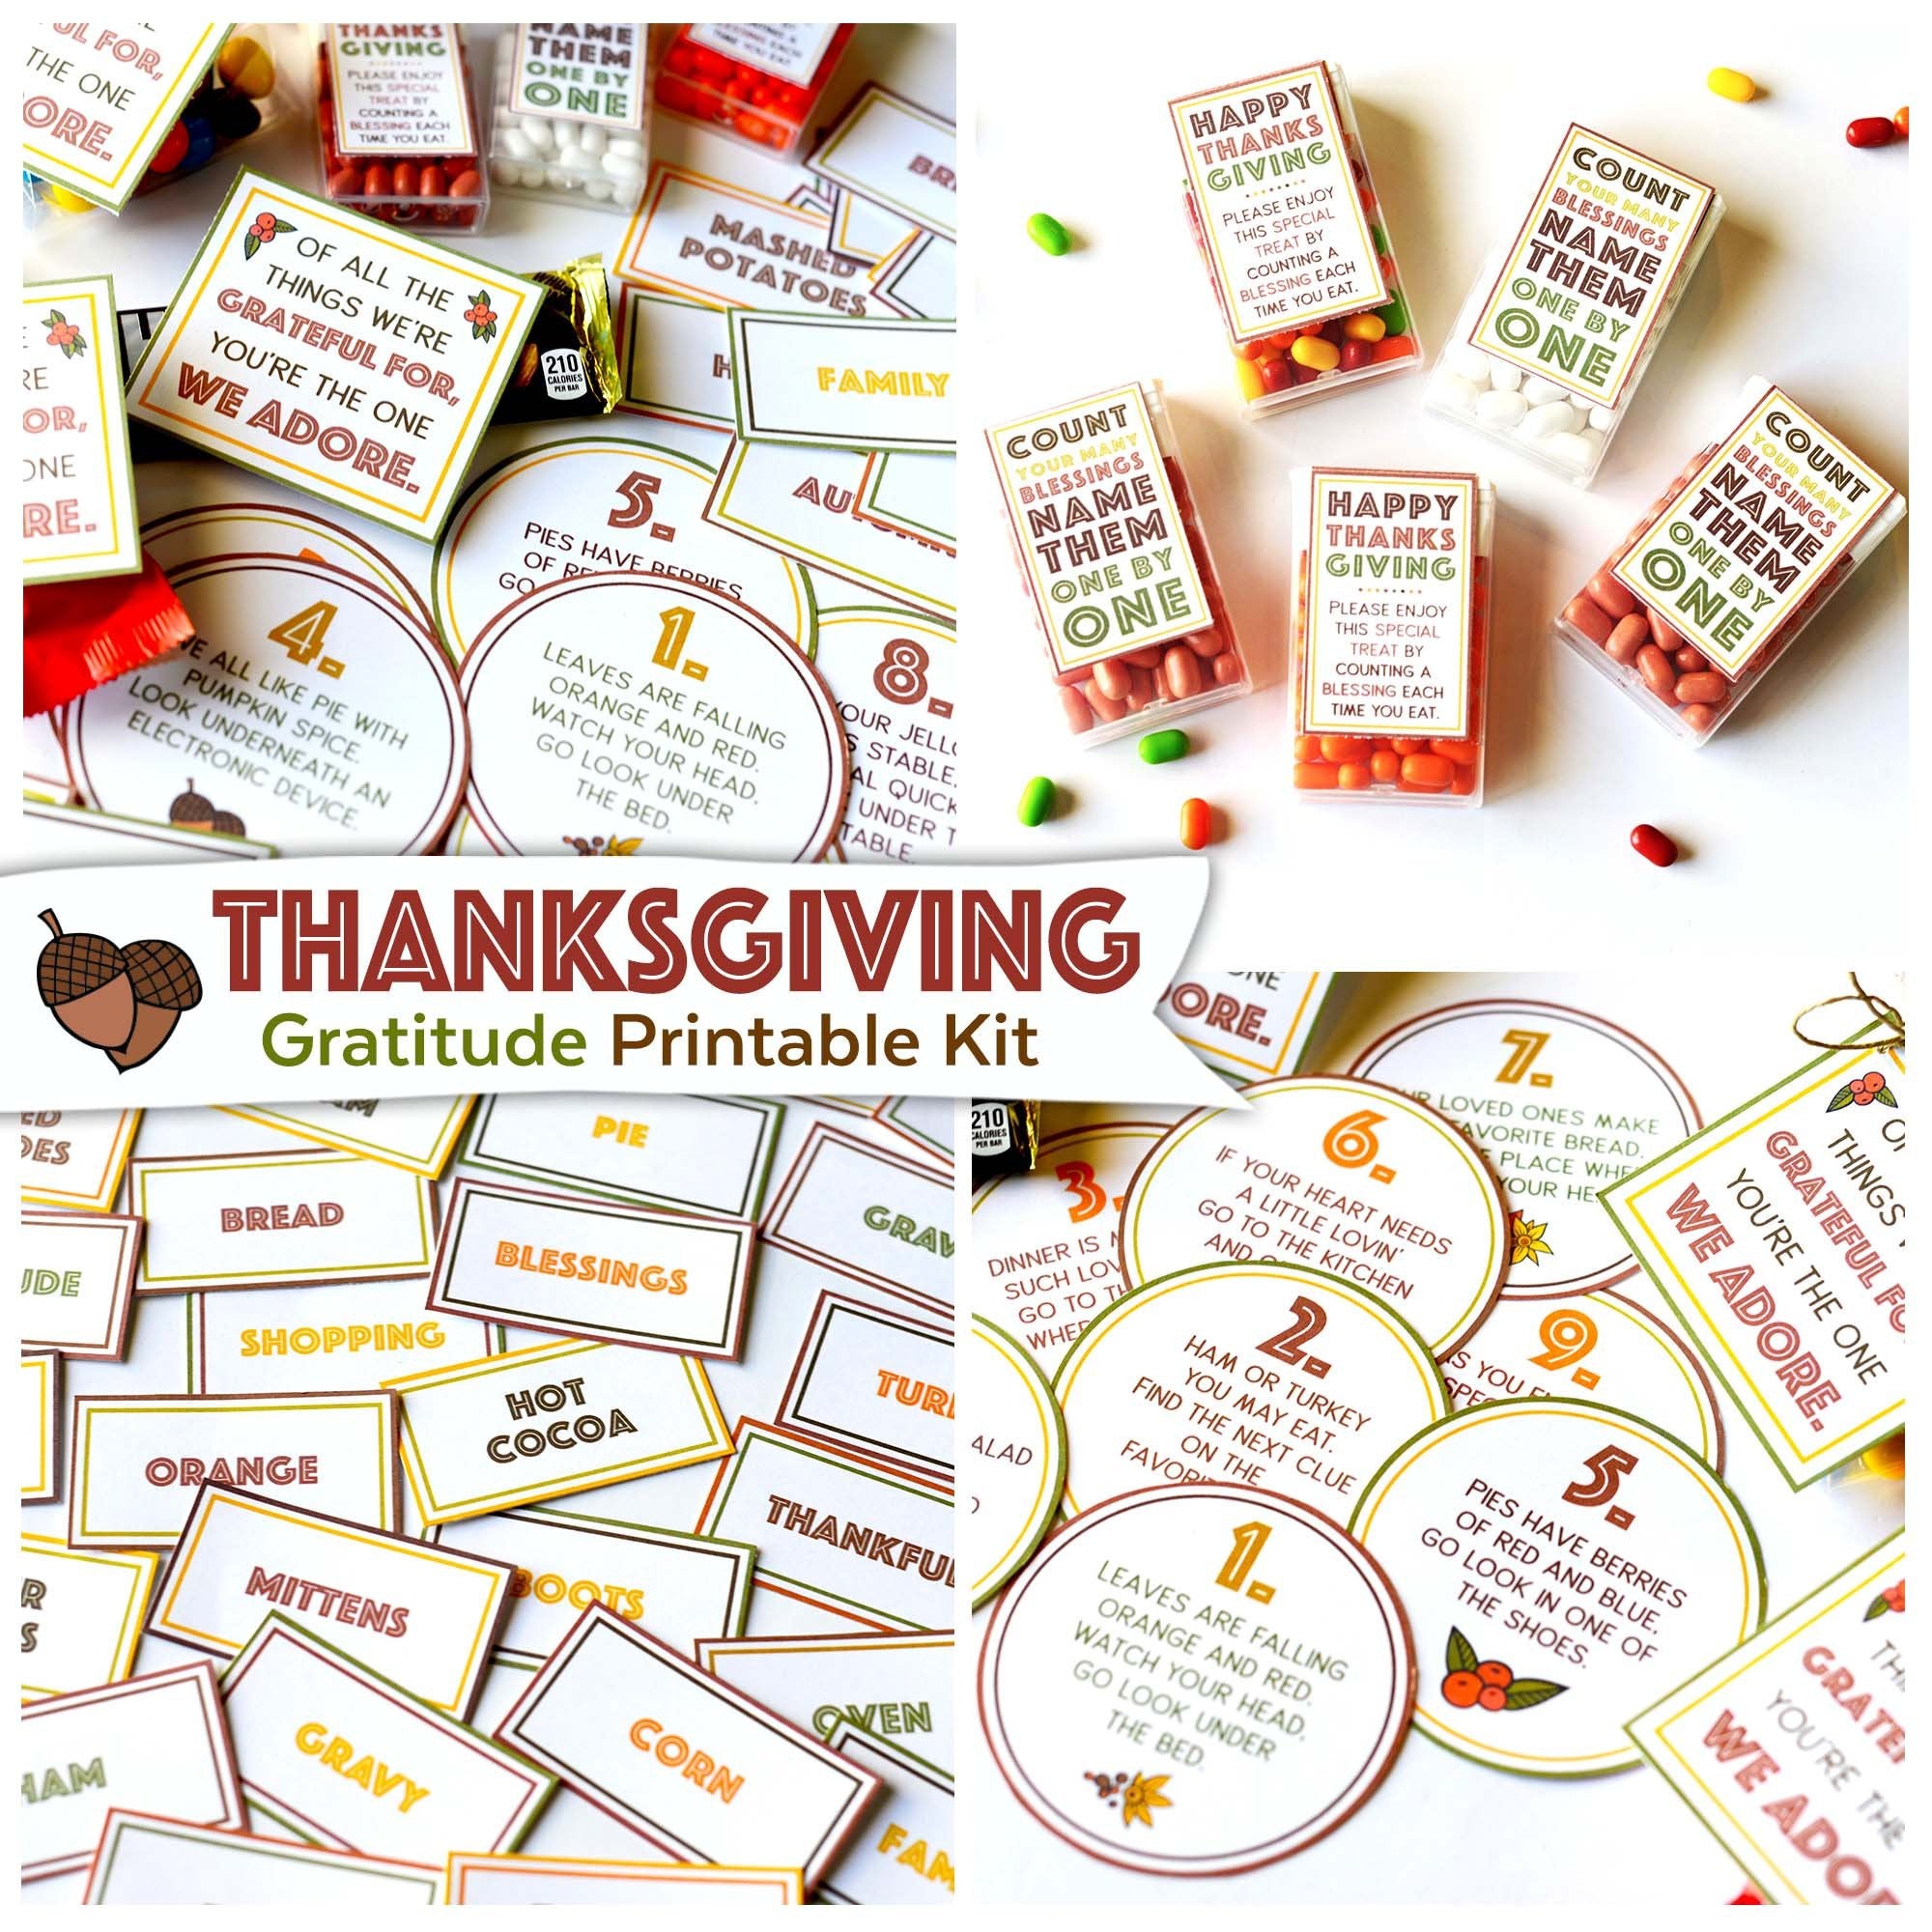 Holiday Calories Printable Christmas Treat Tags (Instant Download)